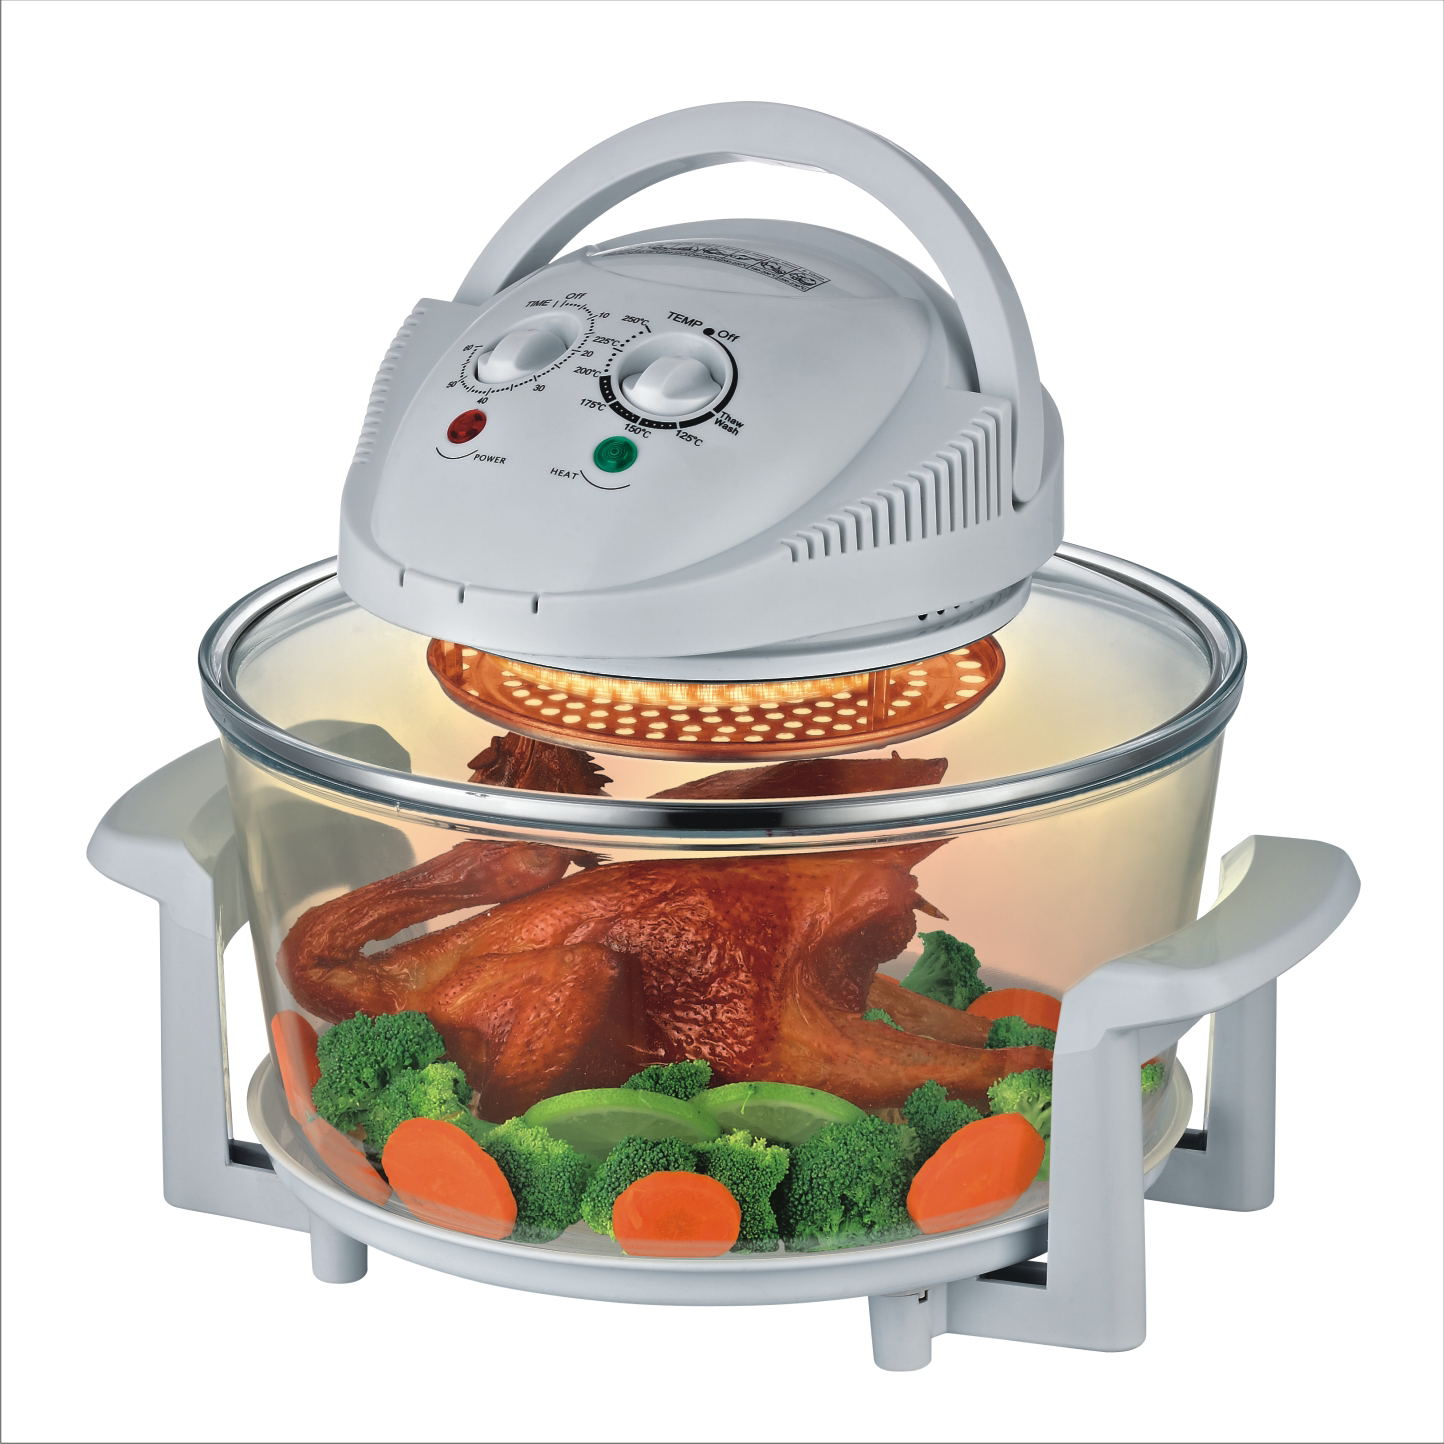 12l El-818 Halogen Oven/ Electric Aerogrill Oven - Buy Halogen Oven,Electric  Aerogrill Oven,Halogen Aerogrill Oven Product on Alibaba.com